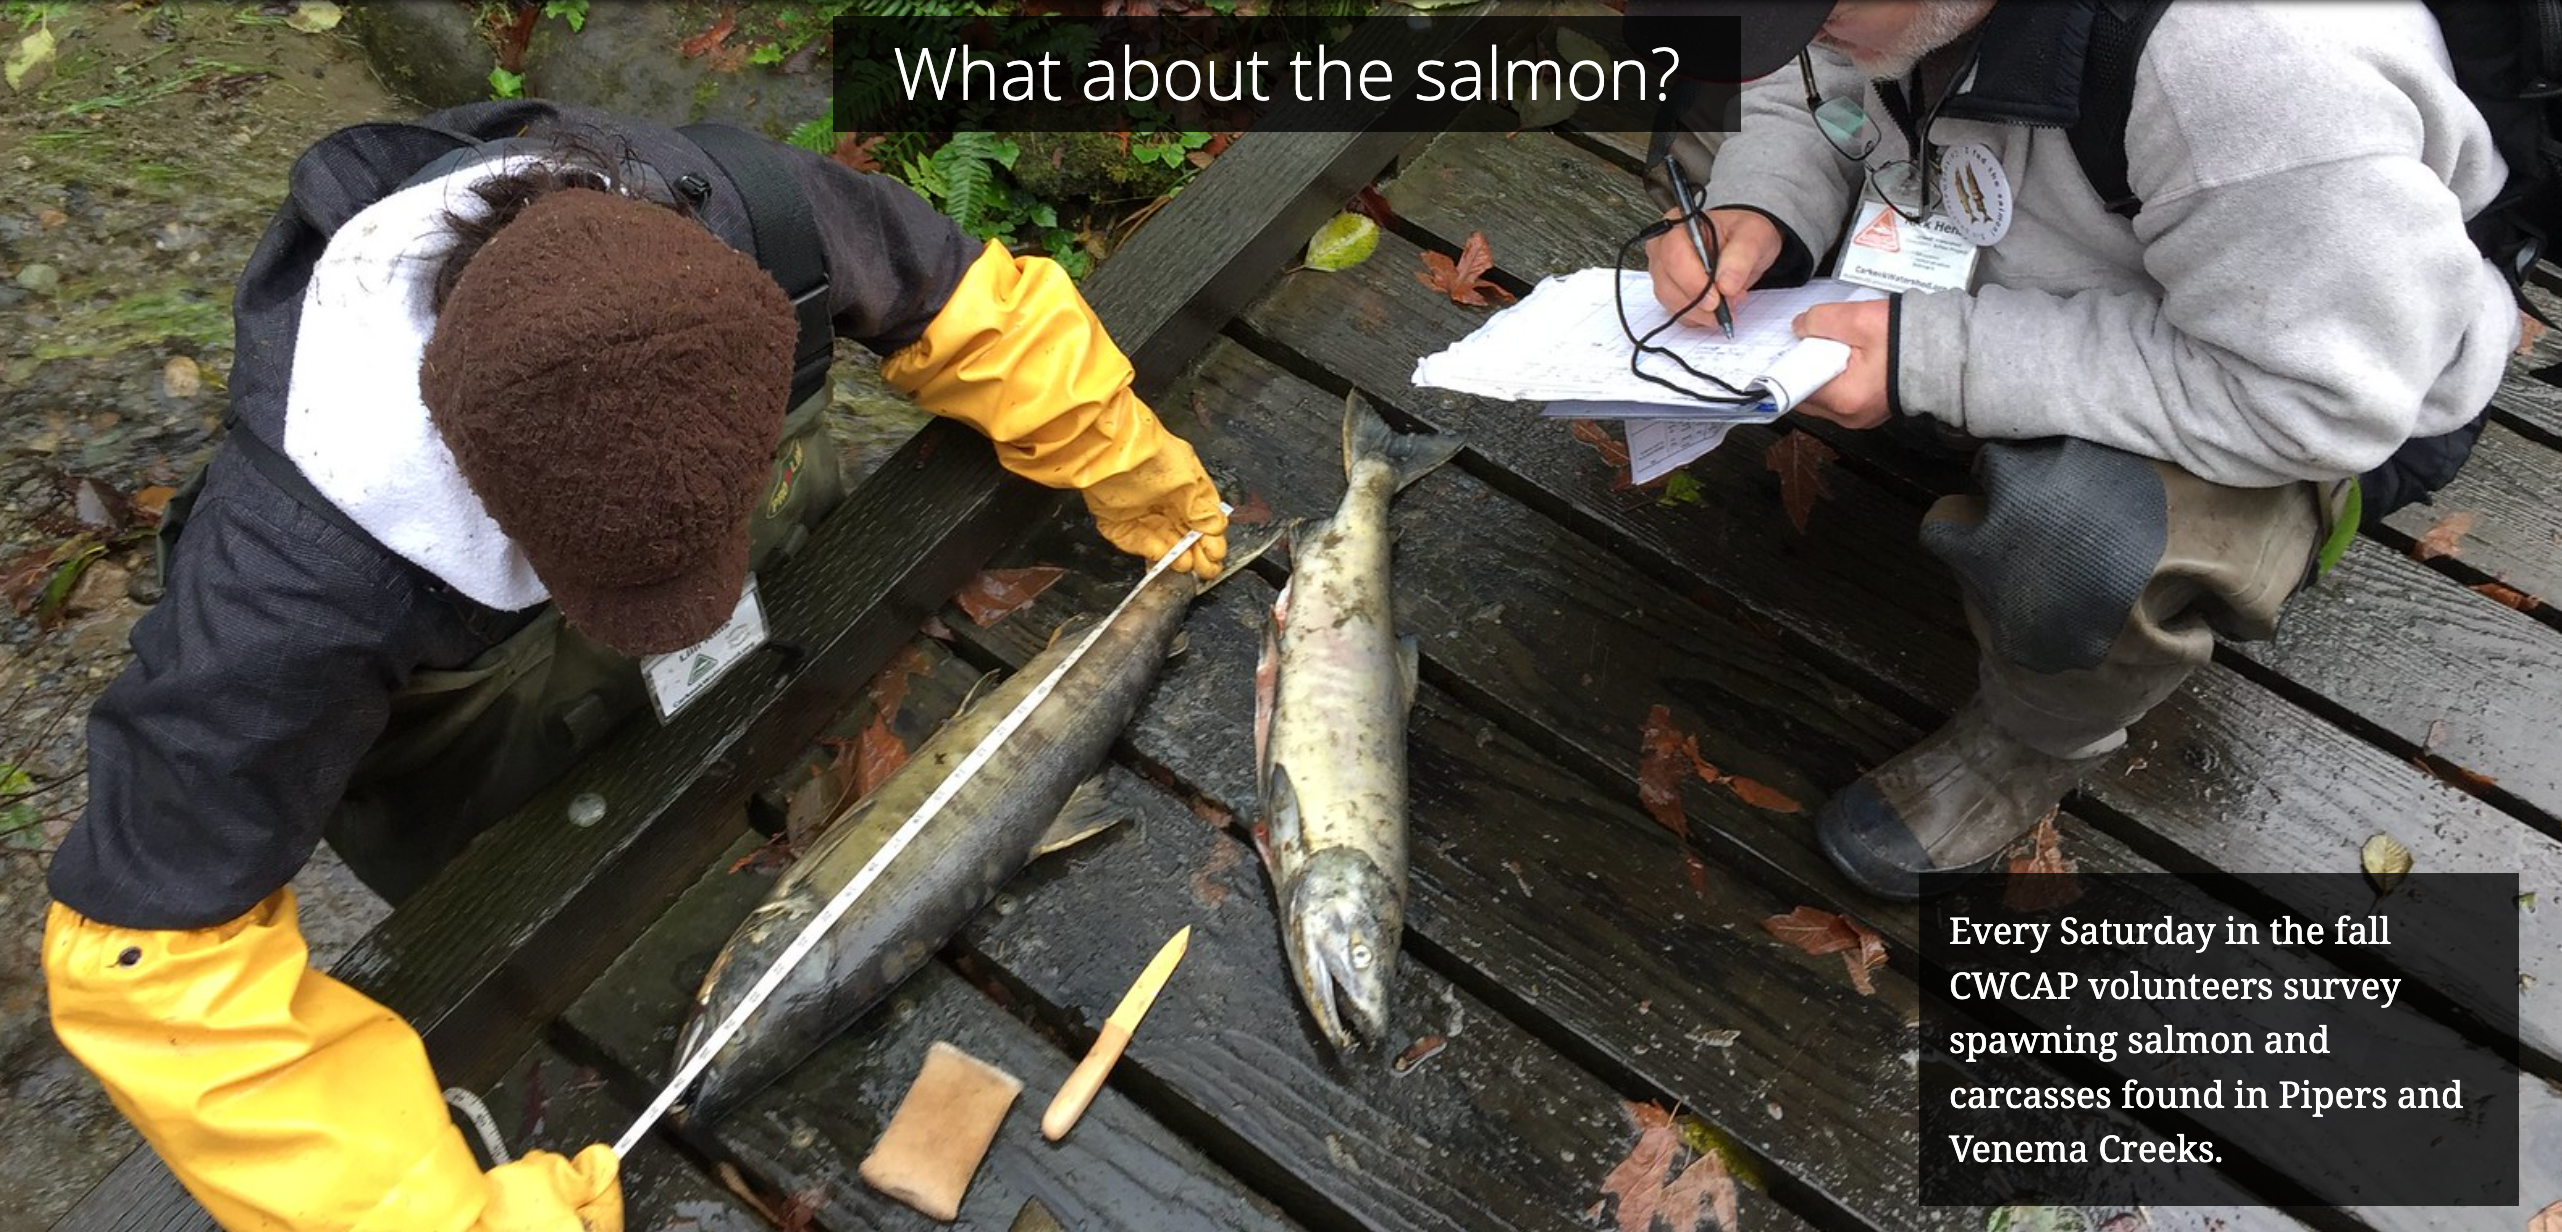 Students measuring salmon on a dock